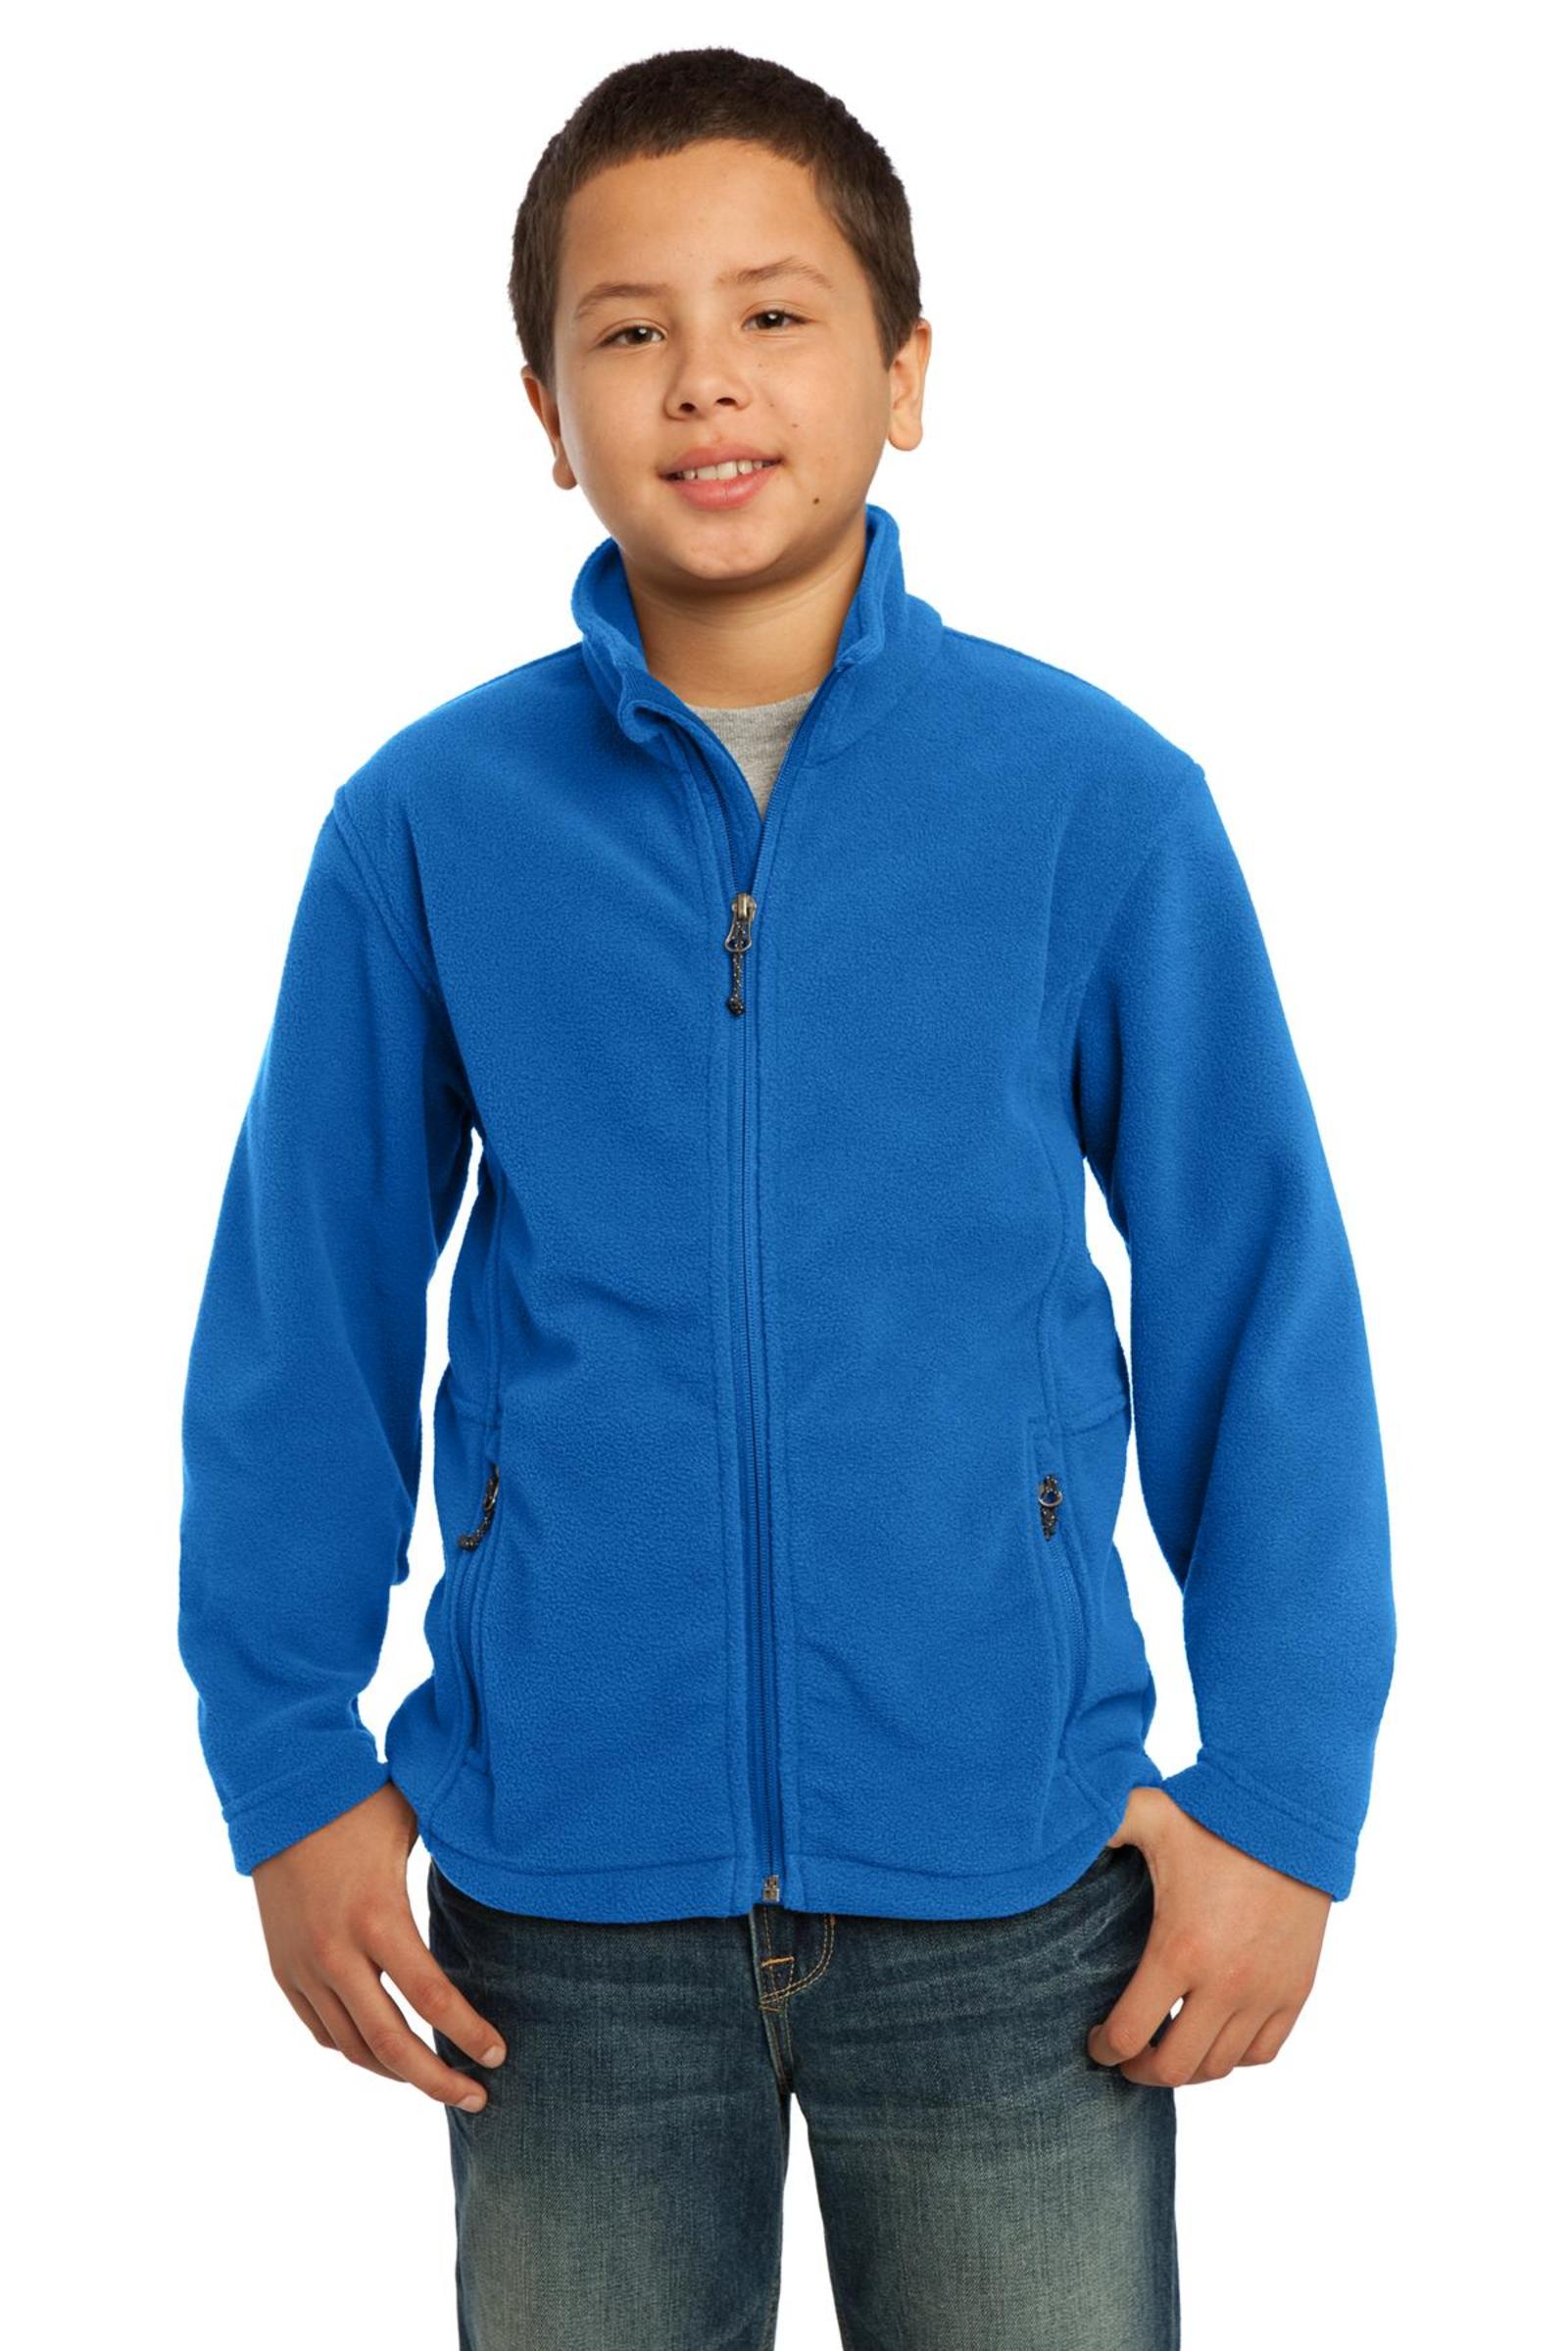 Port Authority Embroidered Youth Value Fleece Jacket